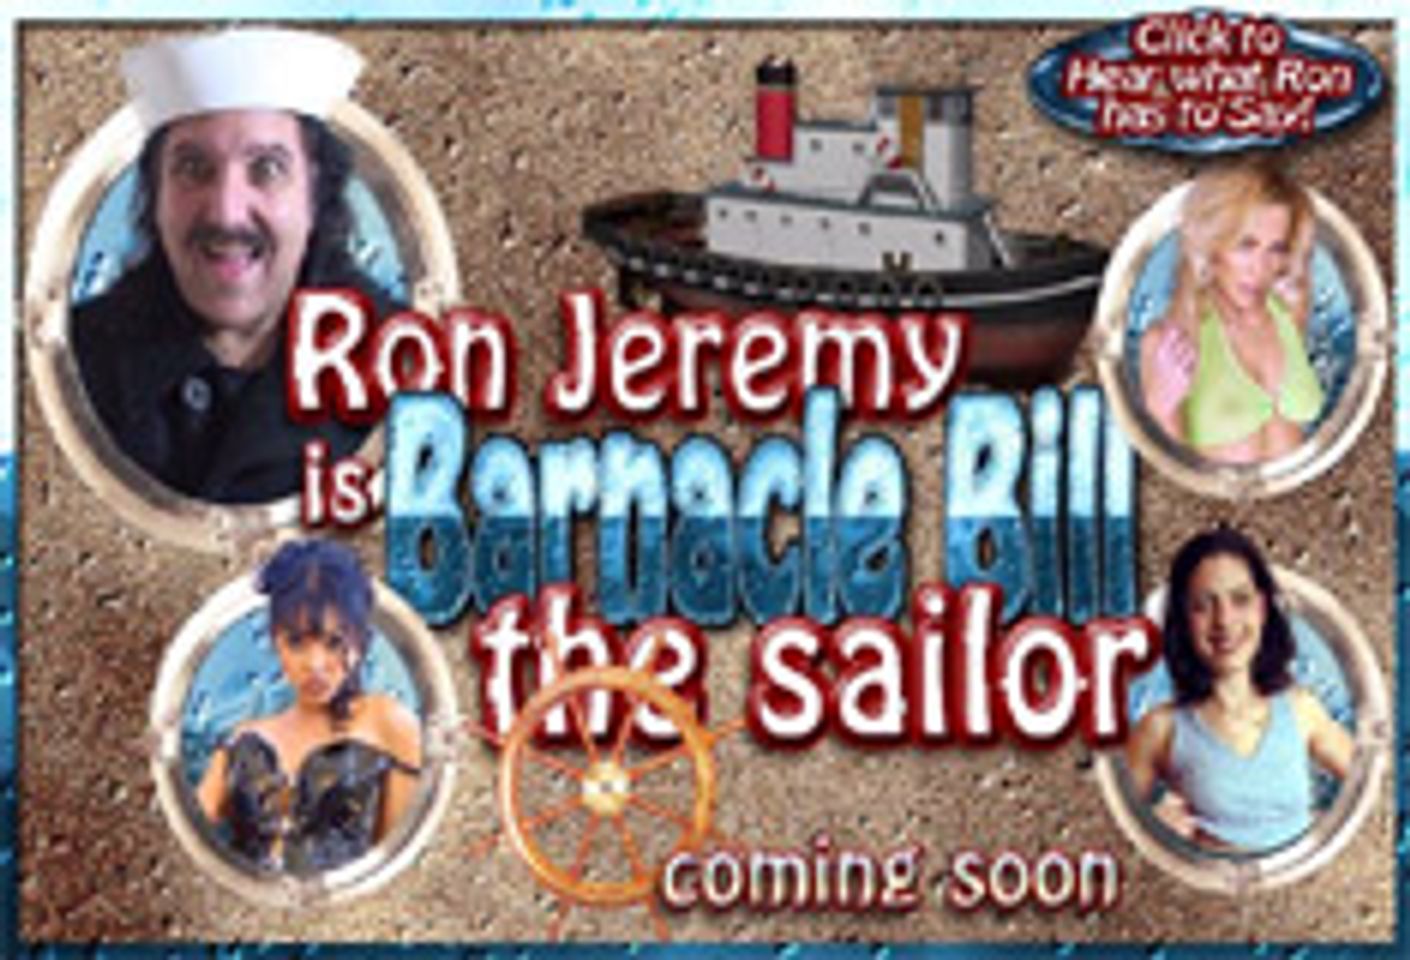 <I>Barnacle Bill the Sailor</I> Launching In September